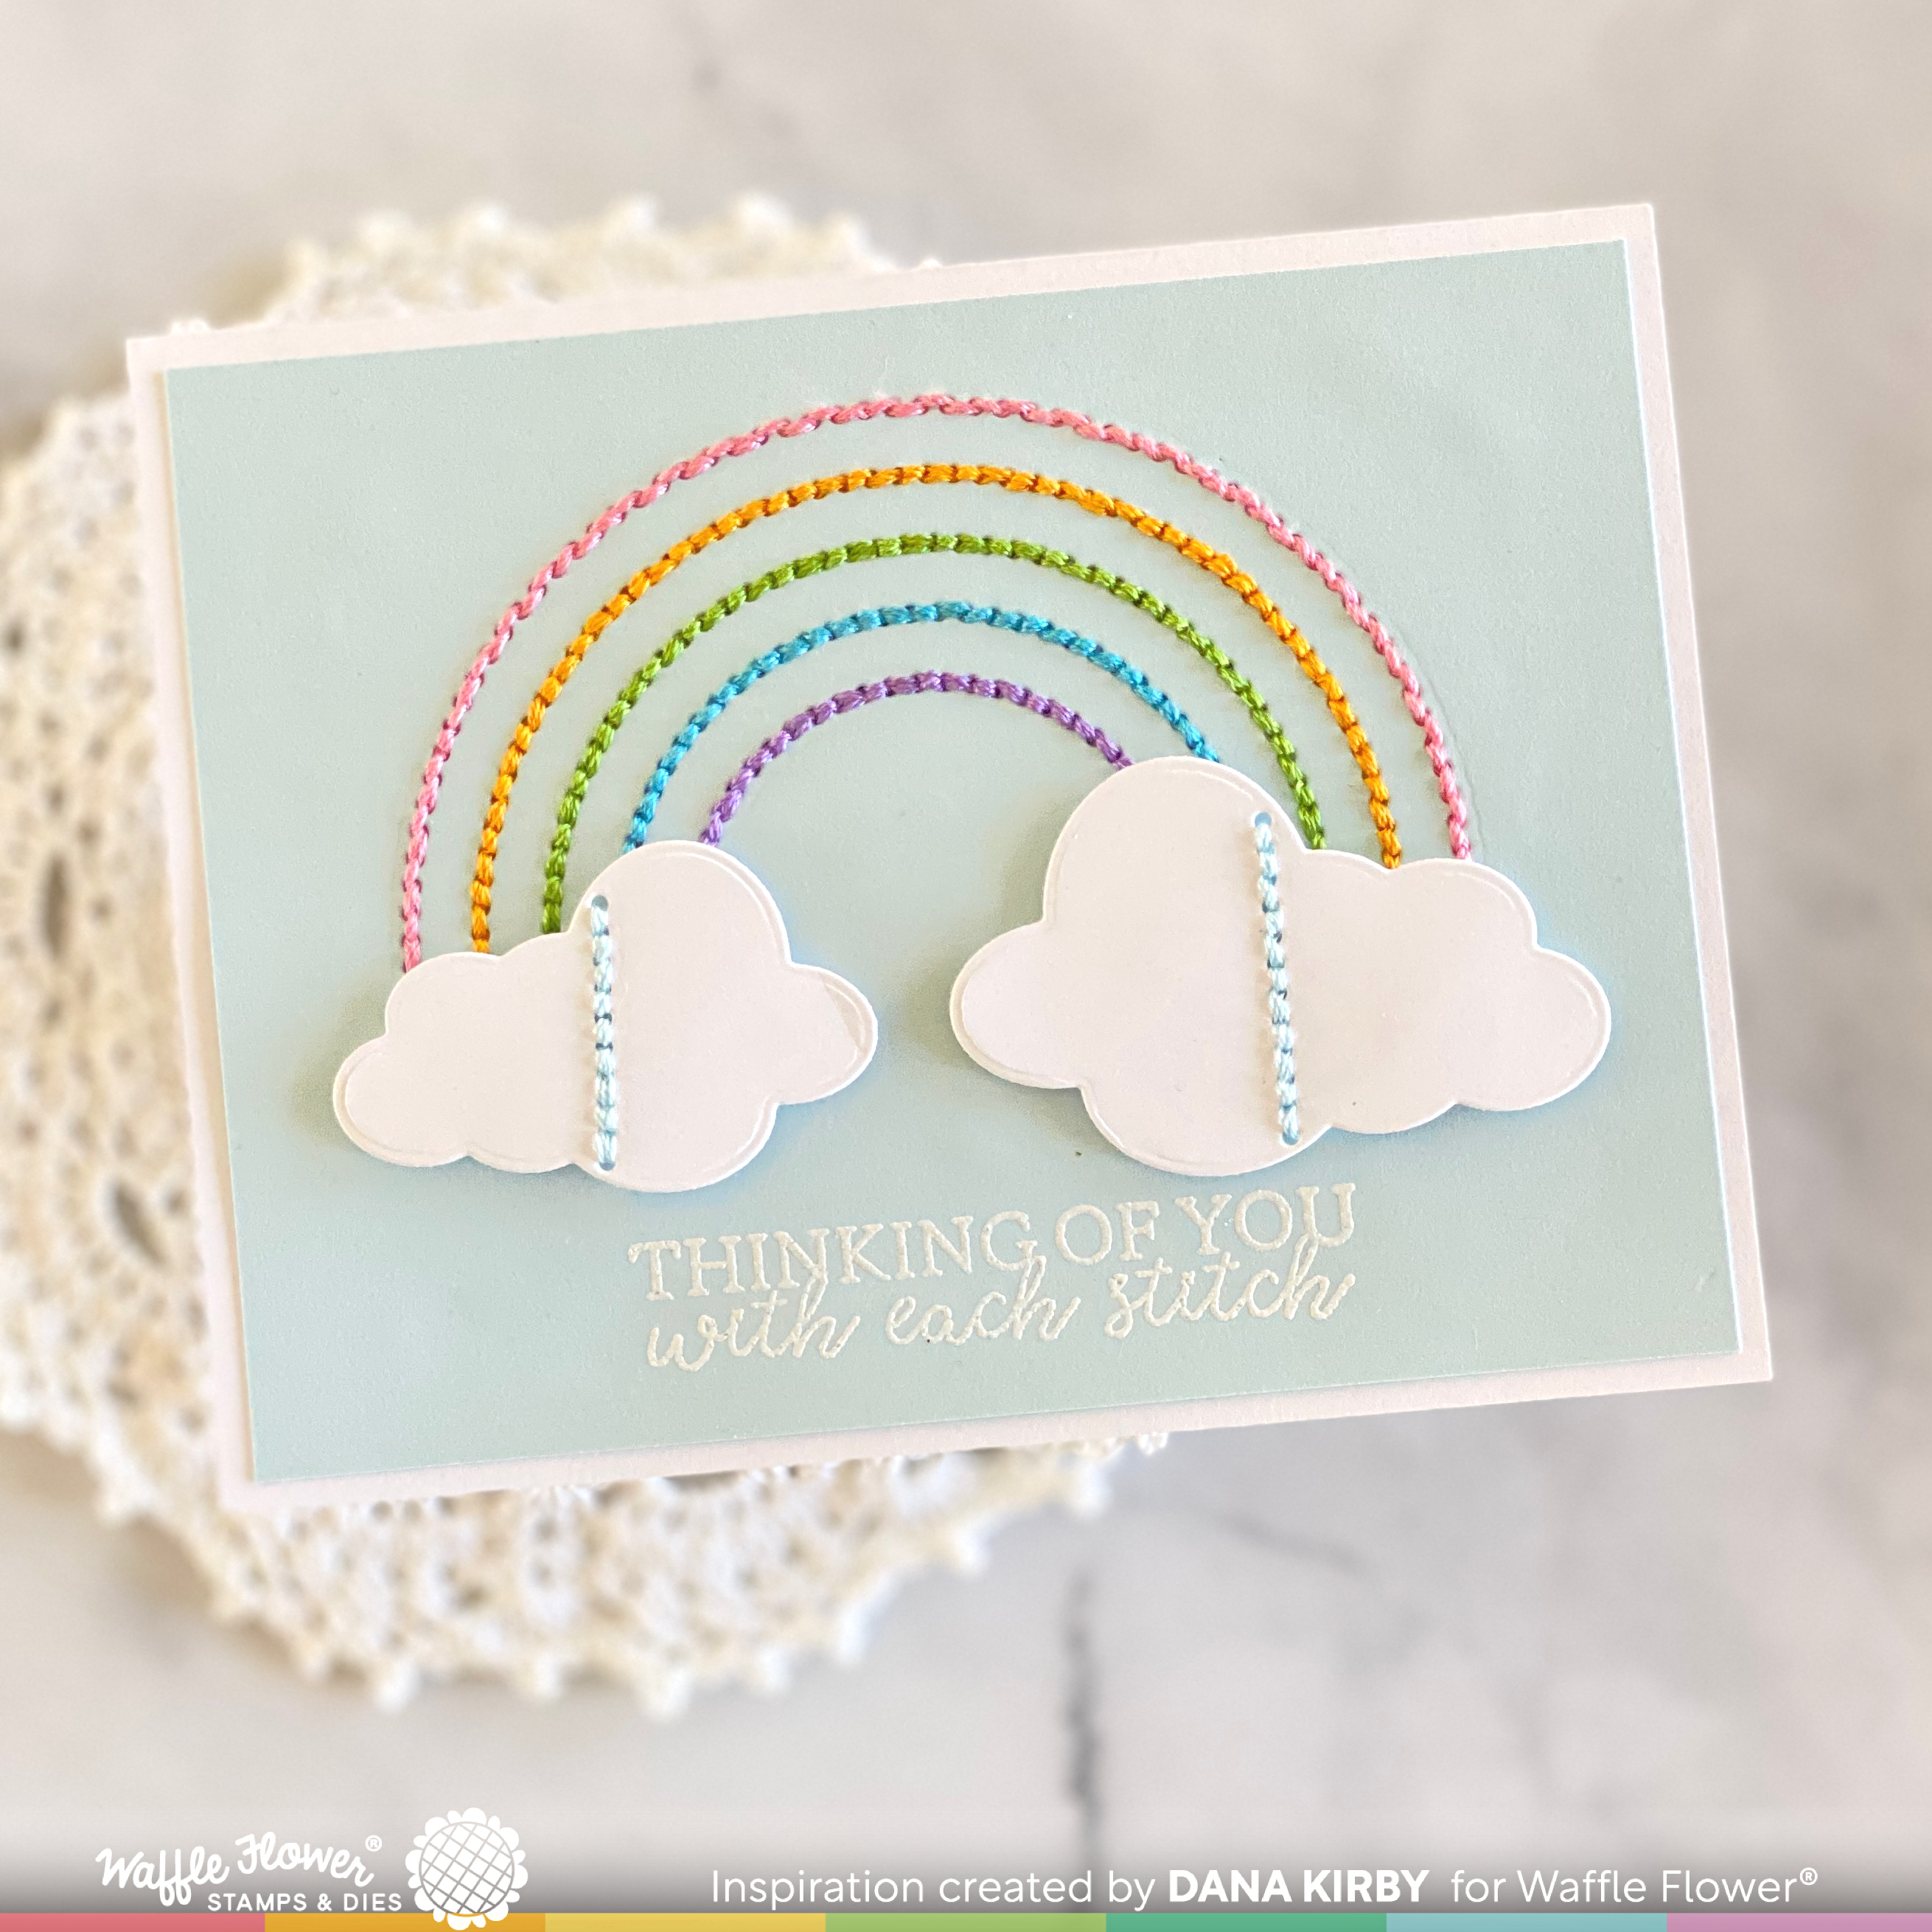 Waffle Flower Crafts August 2023 Release and Blog Hop